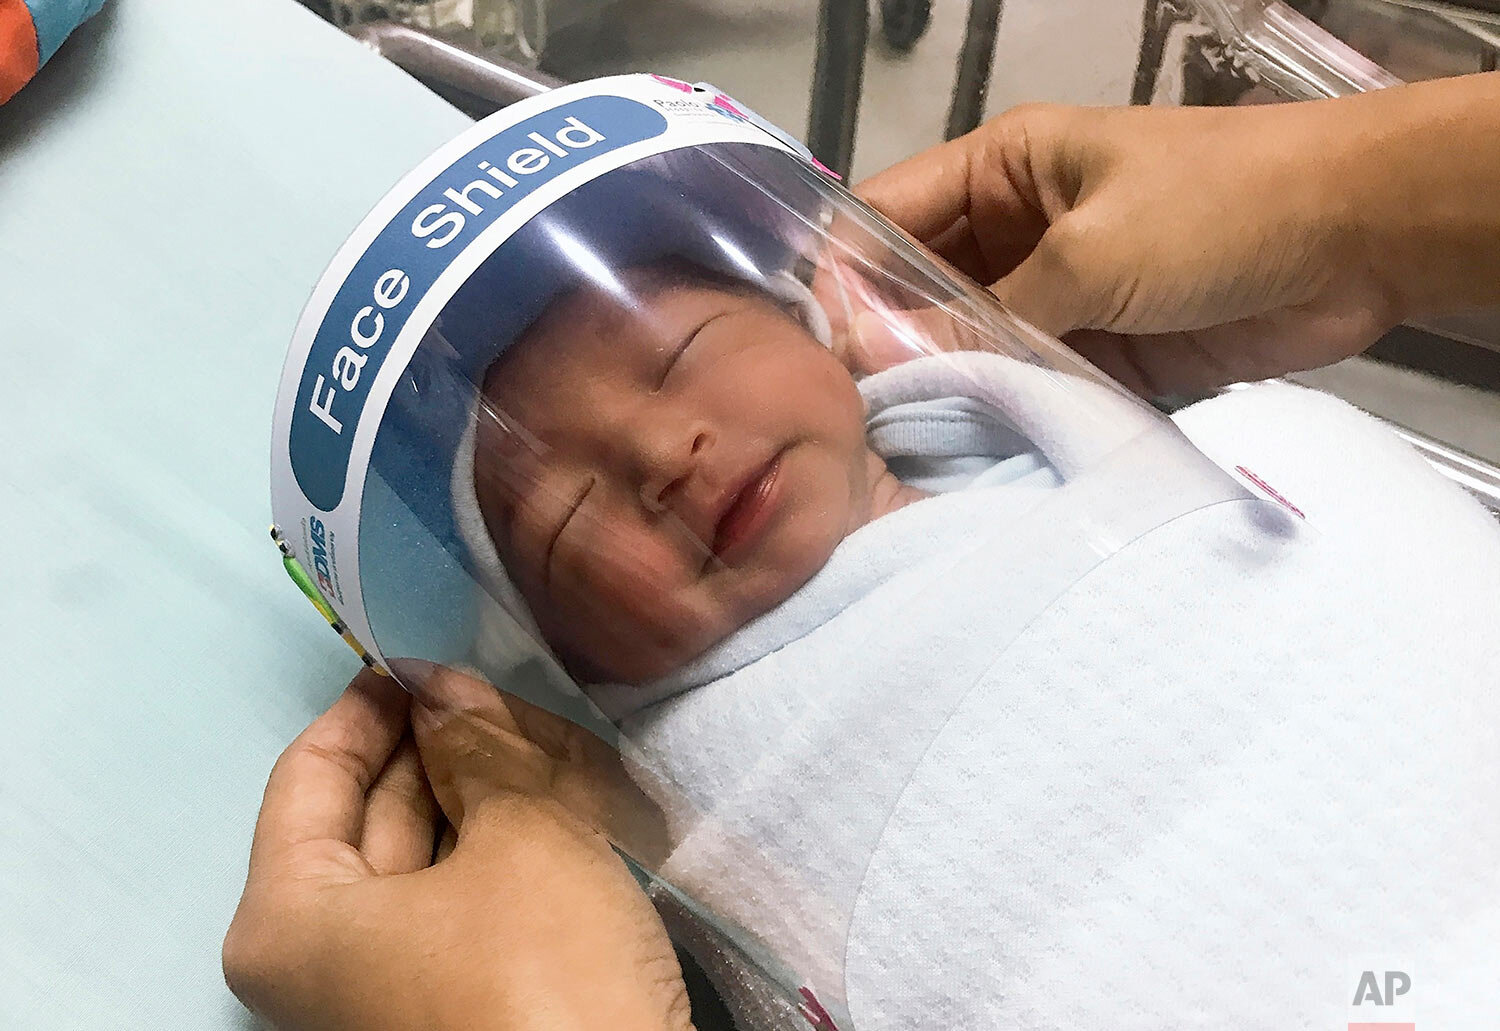  In this photo released by Paolo Hospital Samutprakarn, a nurse adjusts tiny face shield for a newborn baby to protect from new coronavirus at the newborn nursery of the hospital in Samutprakarn province, central Thailand, Friday, April 3, 2020.  (Pa